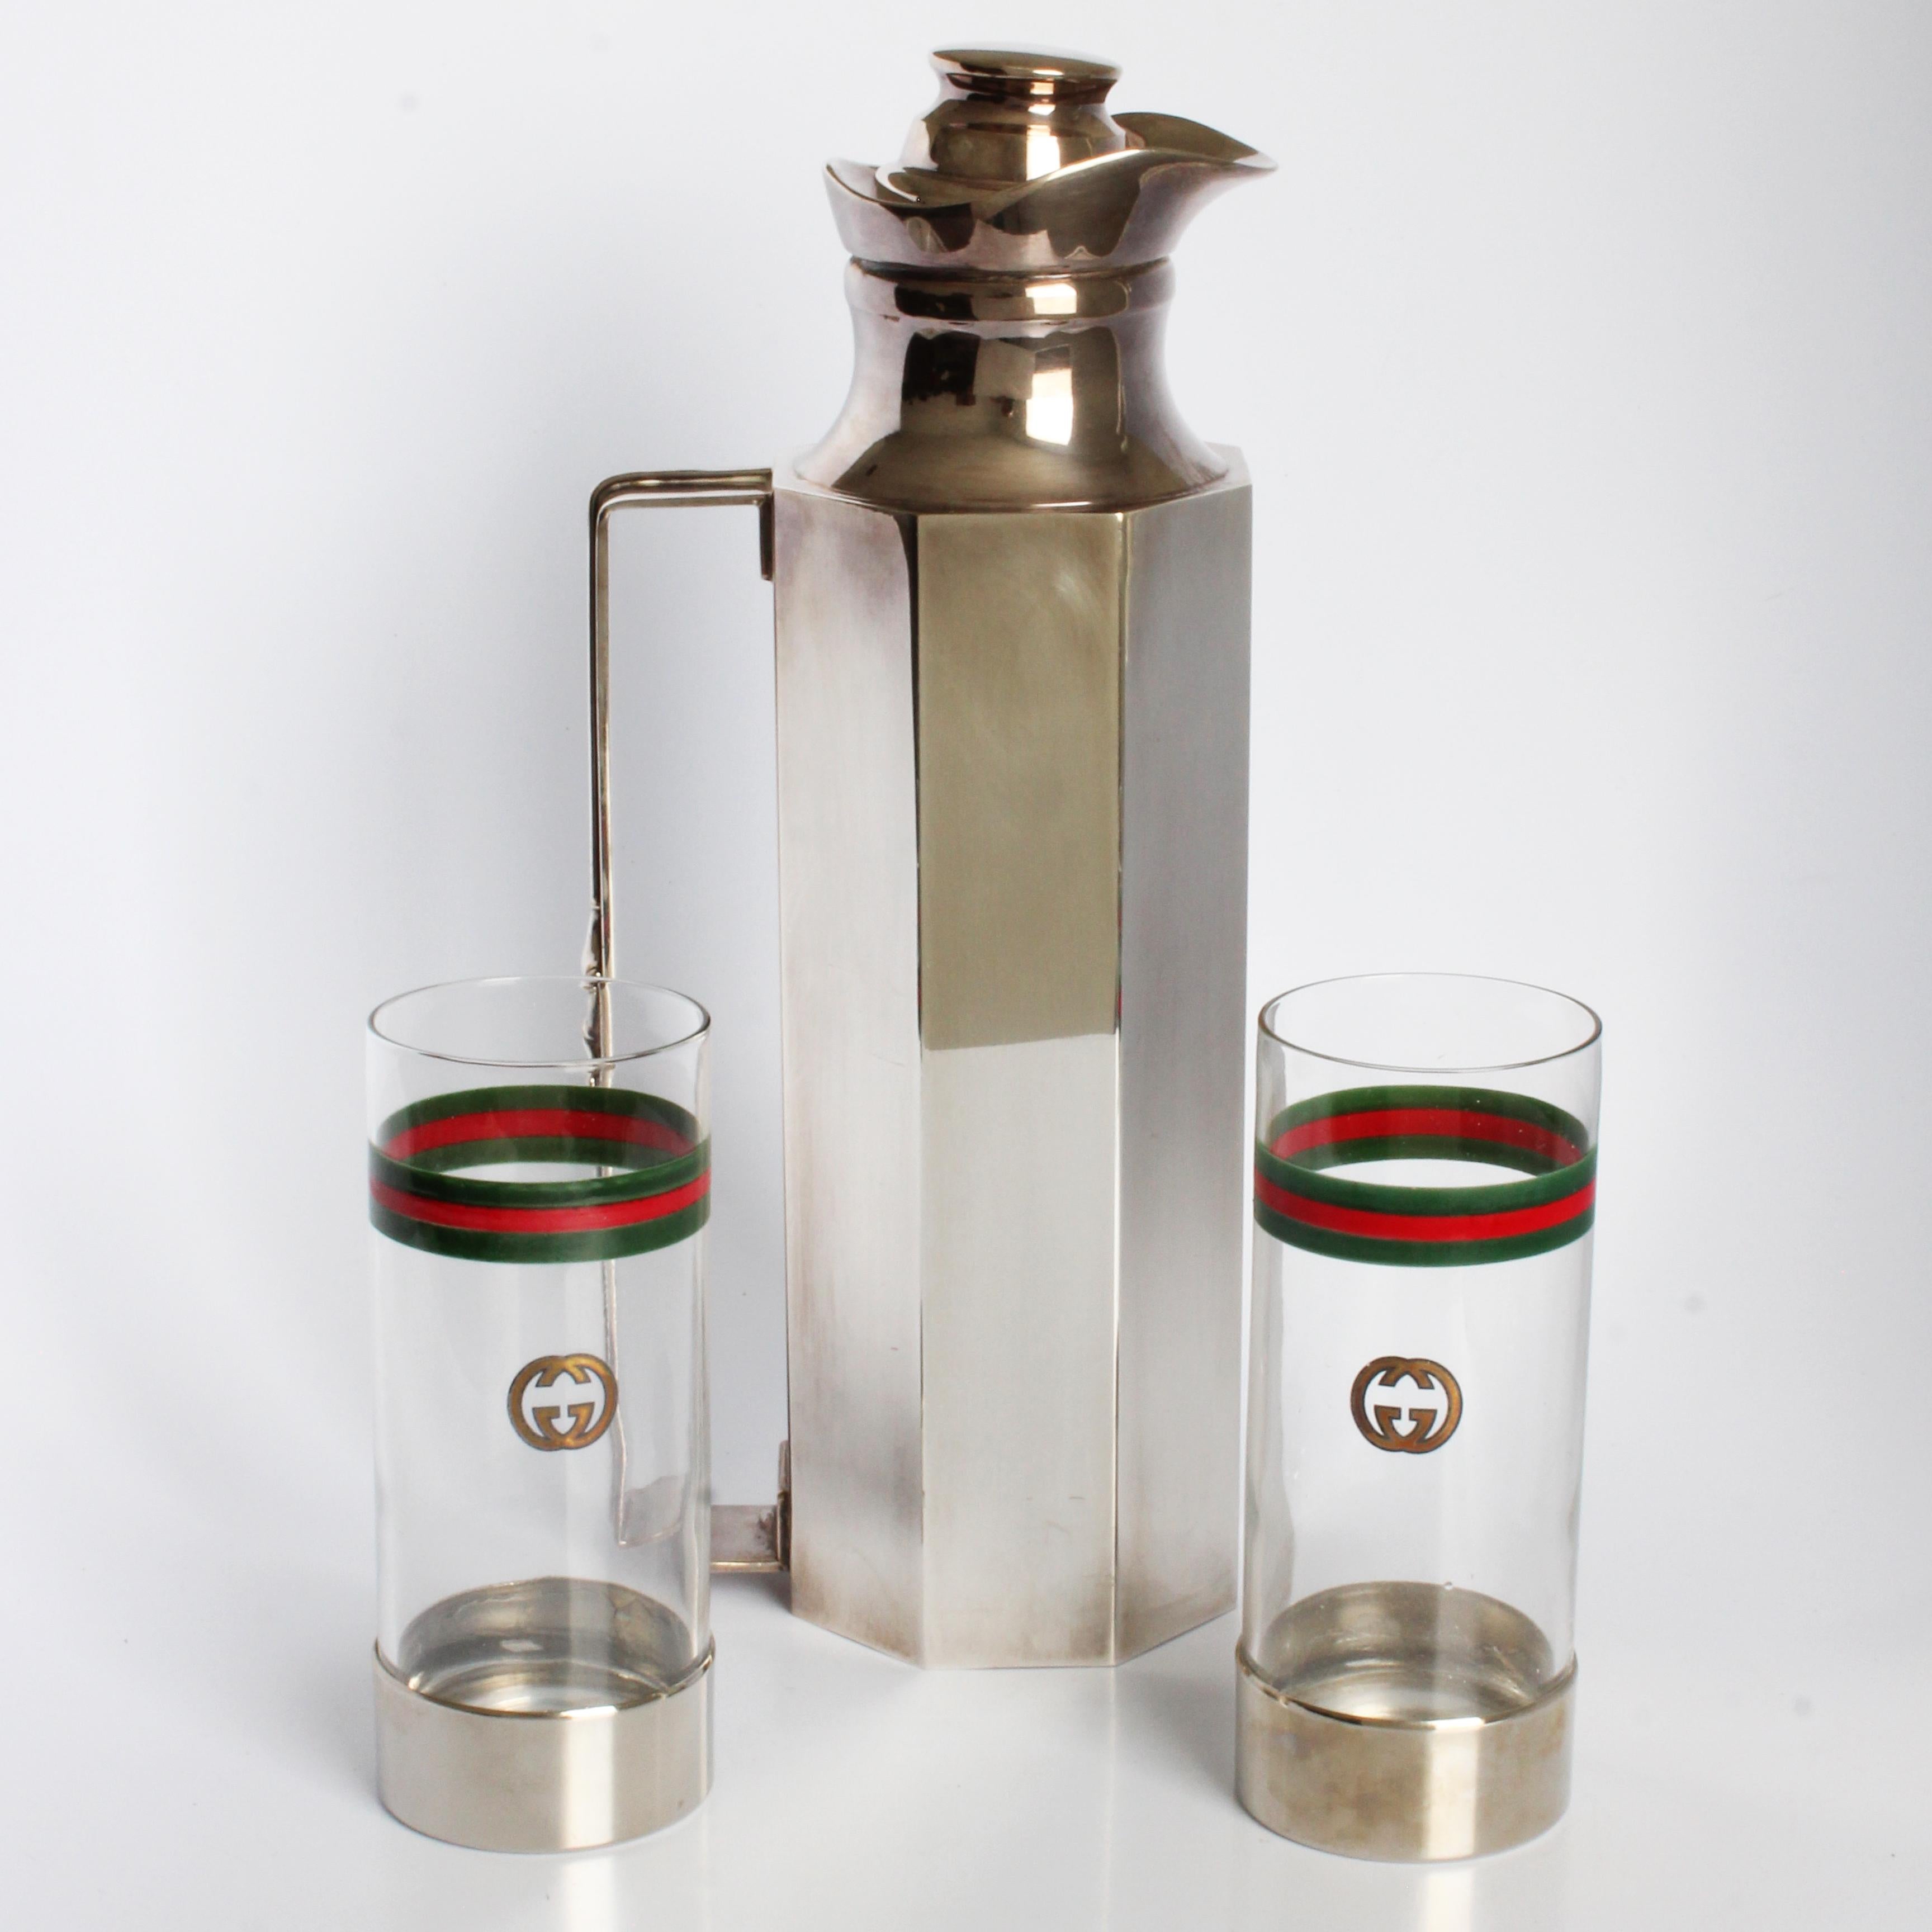 Gucci Barware Set 3pc GG Logo Highball Glasses Horse Bit Decanter Vintage 1970s In Good Condition For Sale In Port Saint Lucie, FL